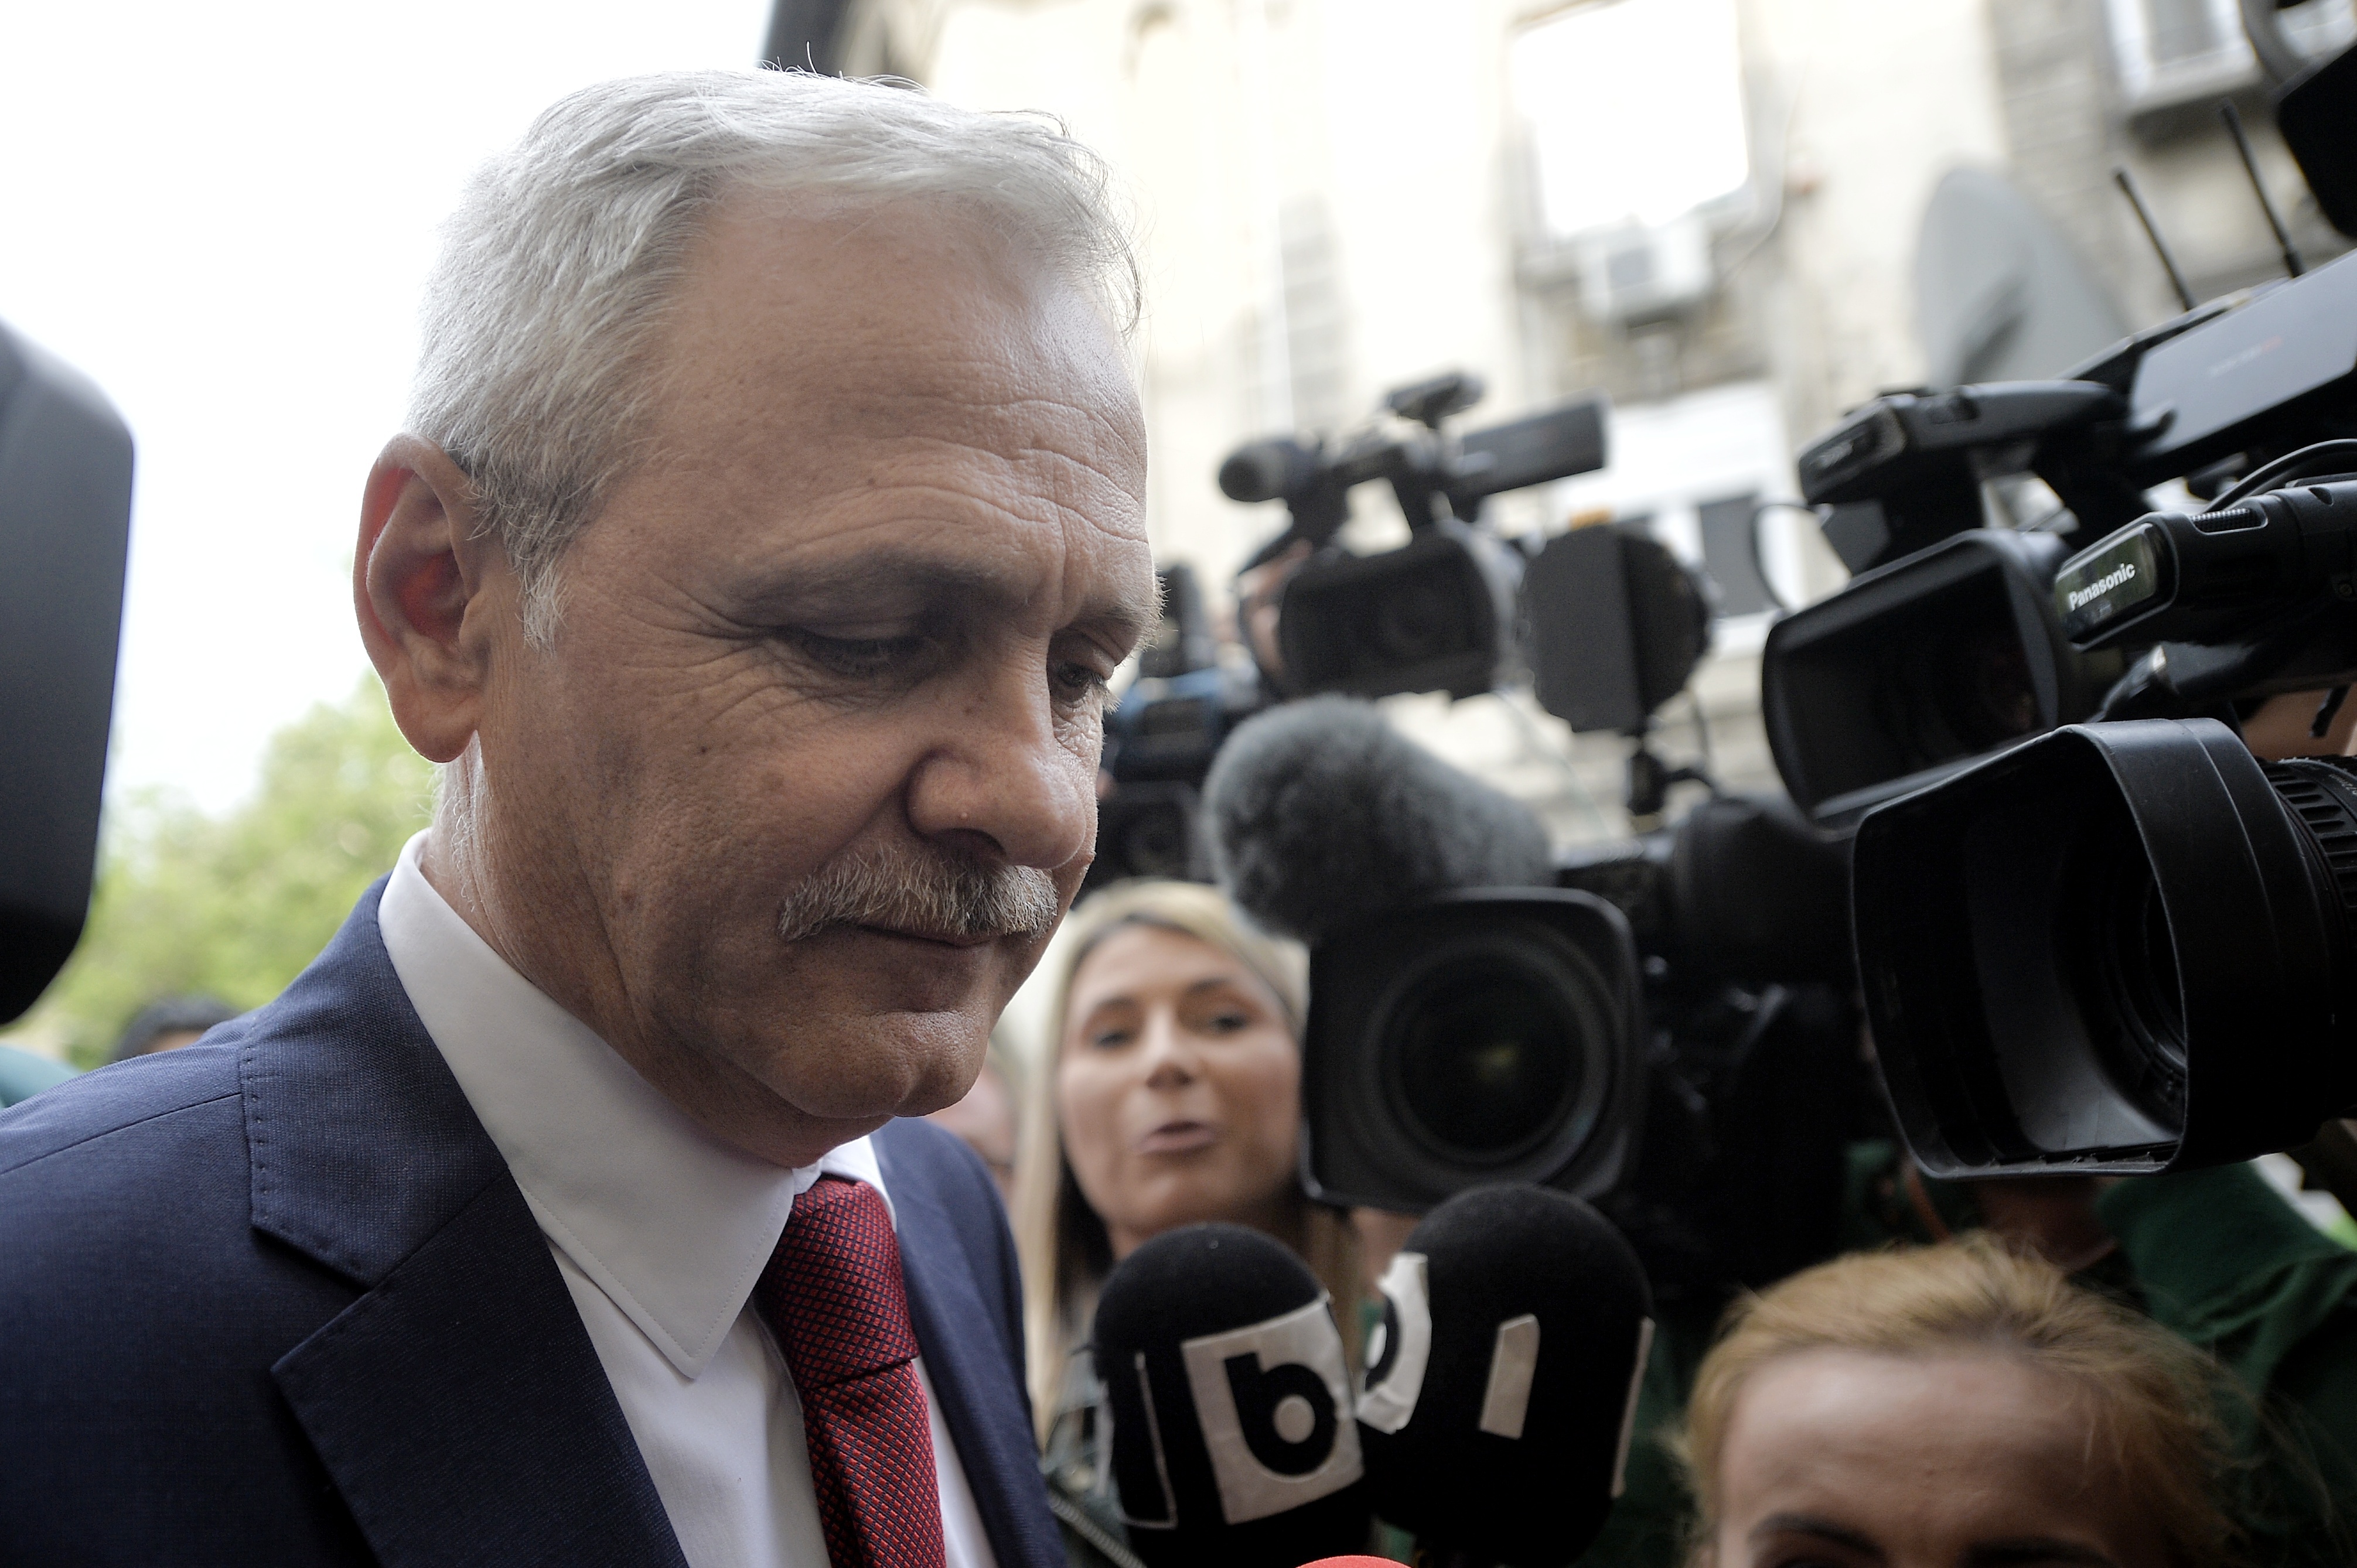 The appeal to the sentence filed by Liviu Dragnea at the Bucharest Tribunal, judged on 18 February